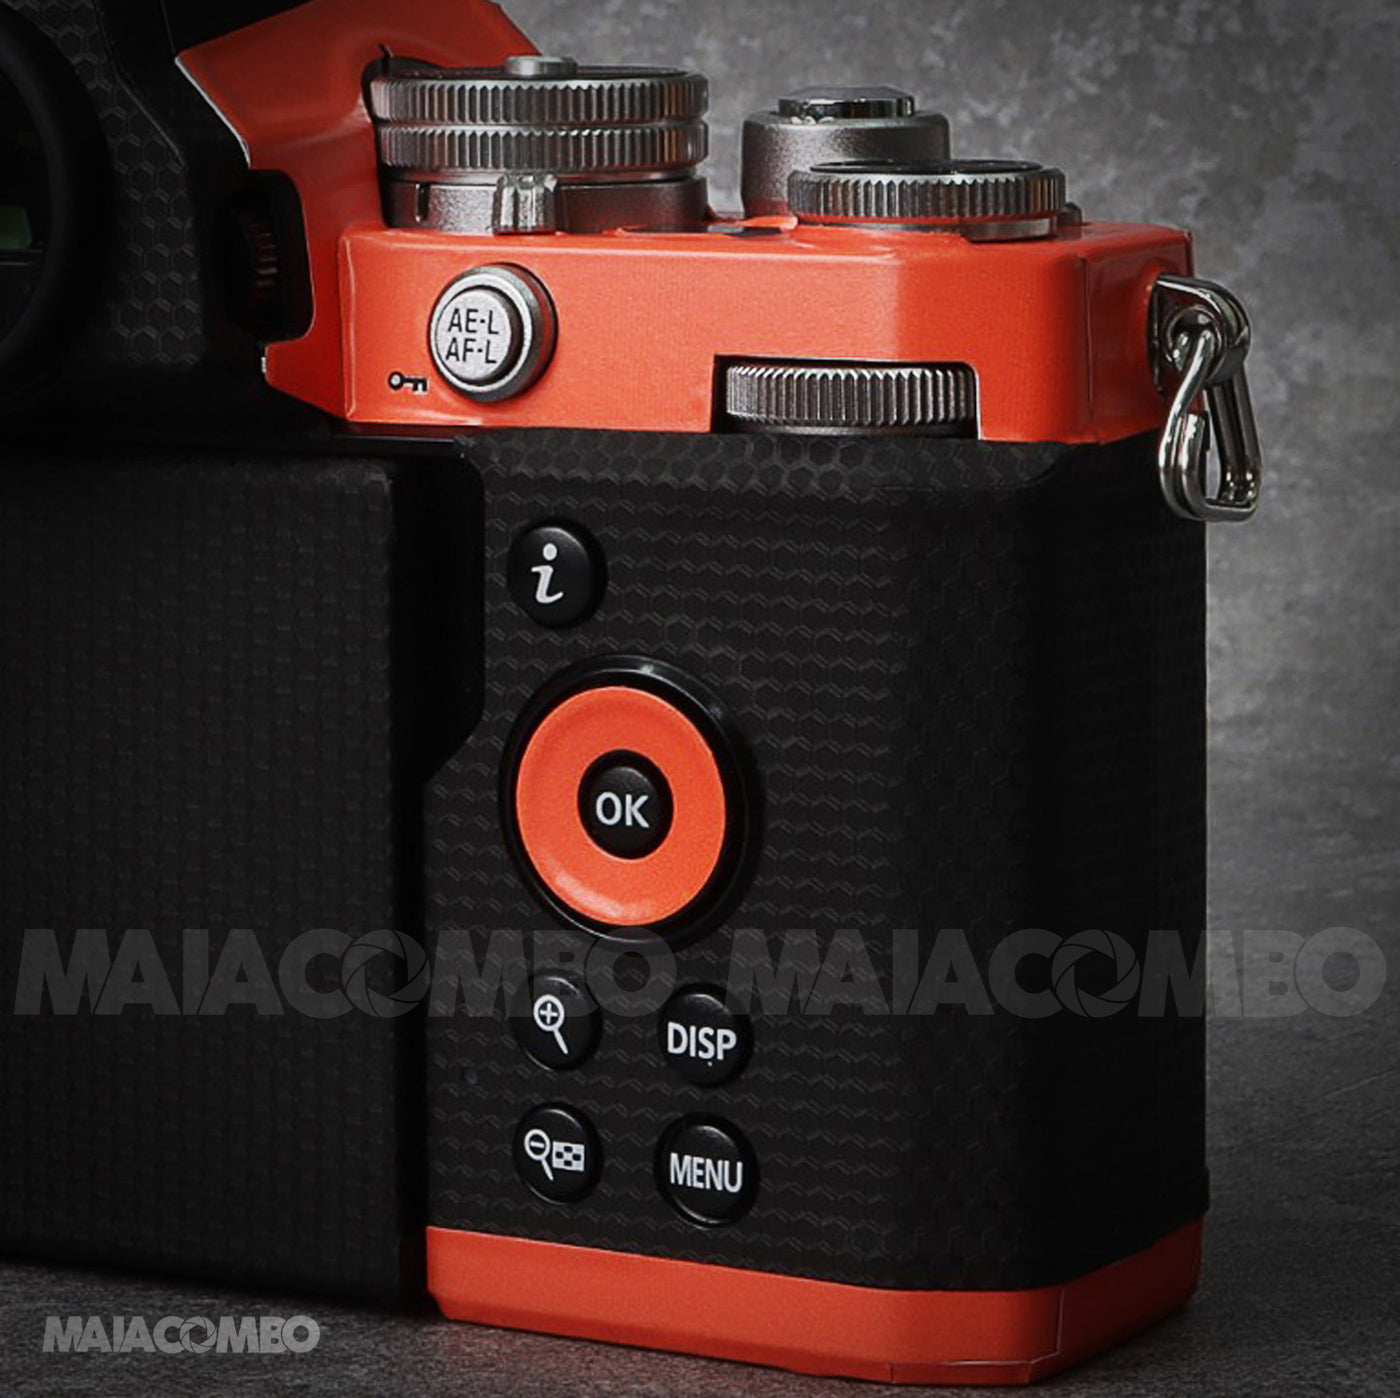 For Nikon ZF Camera Decal Skin Anti-Scratch Wrap Cover Film for